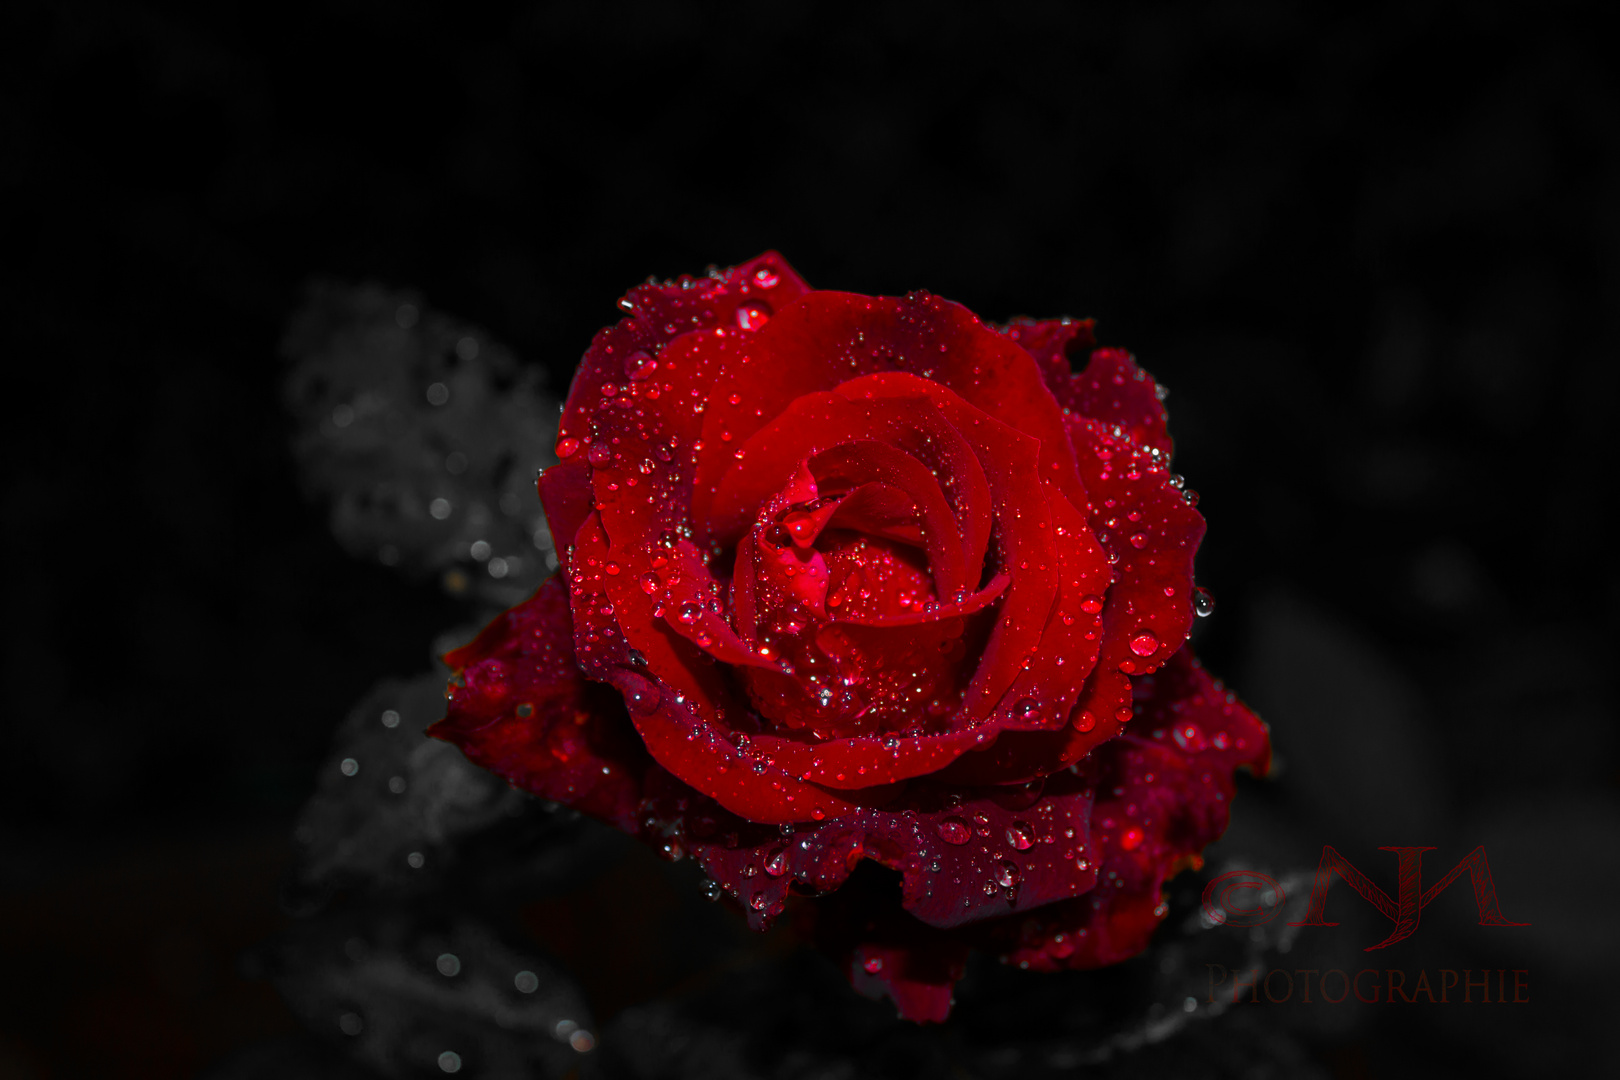 The Rose1